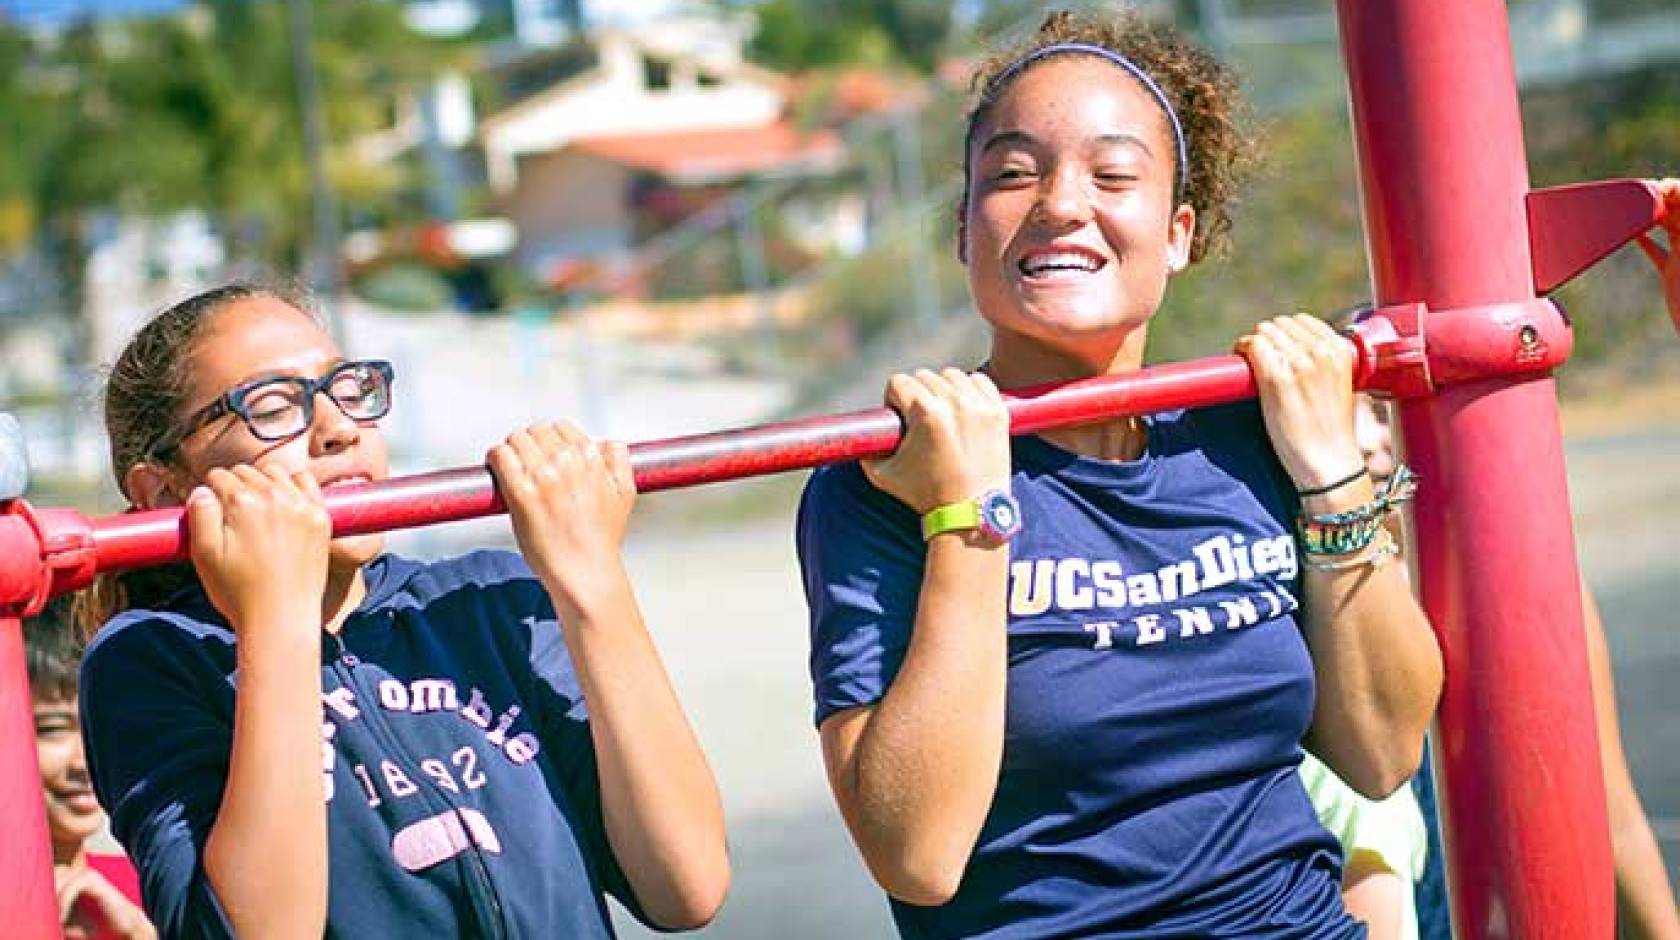 Child and UCSD student-athlete do pullups